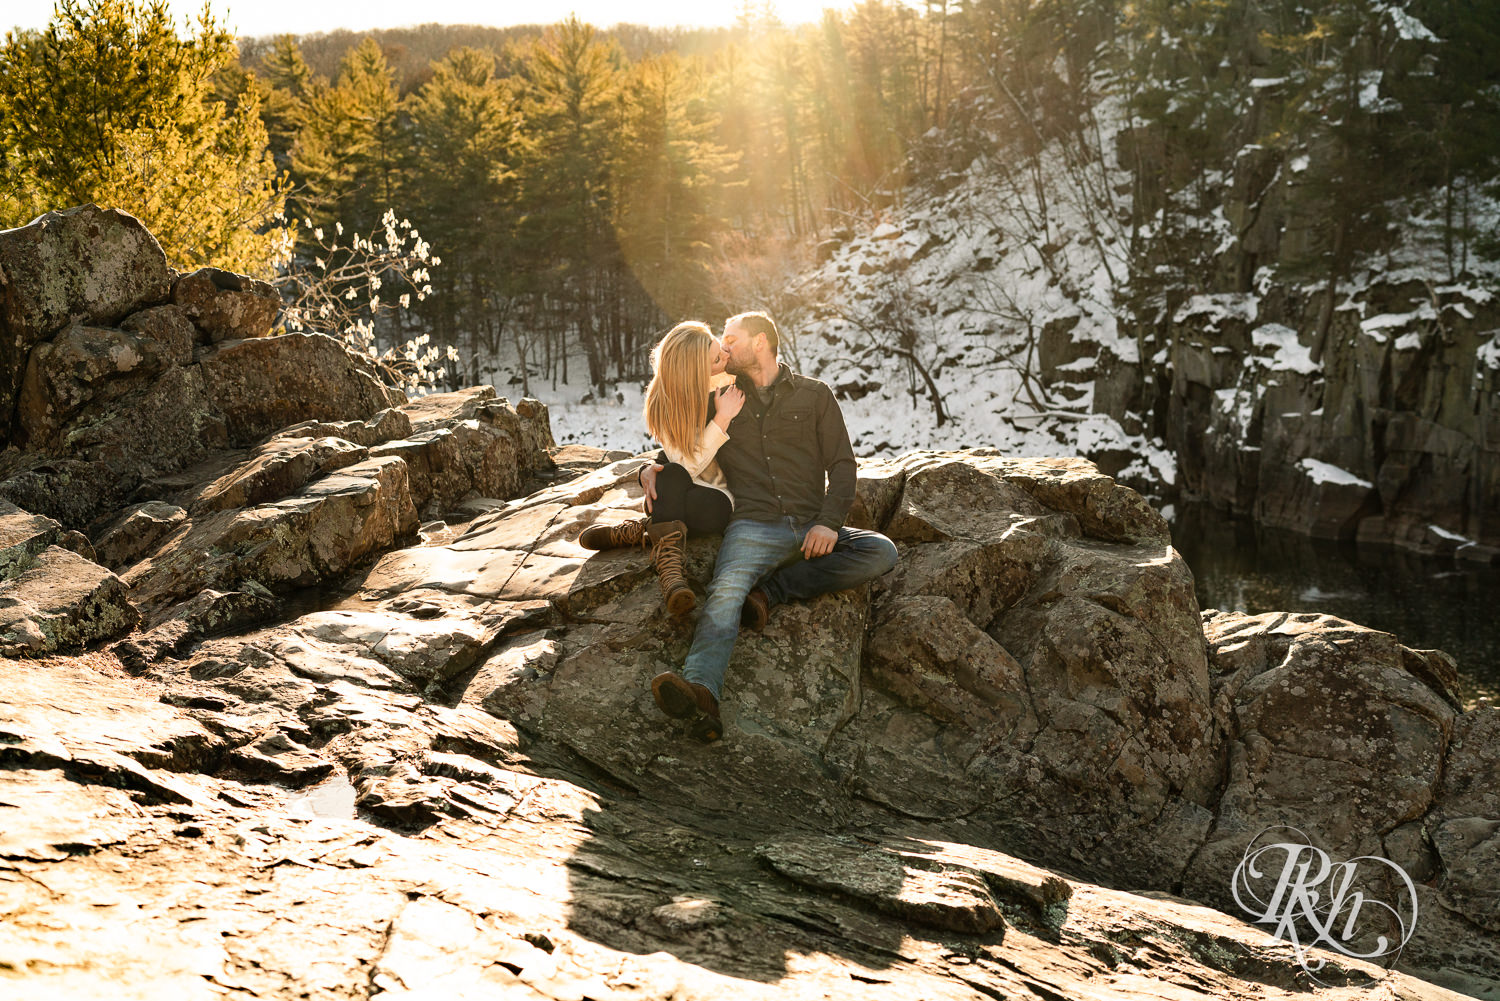 Man in jeans and green shirt and woman in a white sweater kiss during sunrise engagement photography session in Taylors Falls, Minnesota.